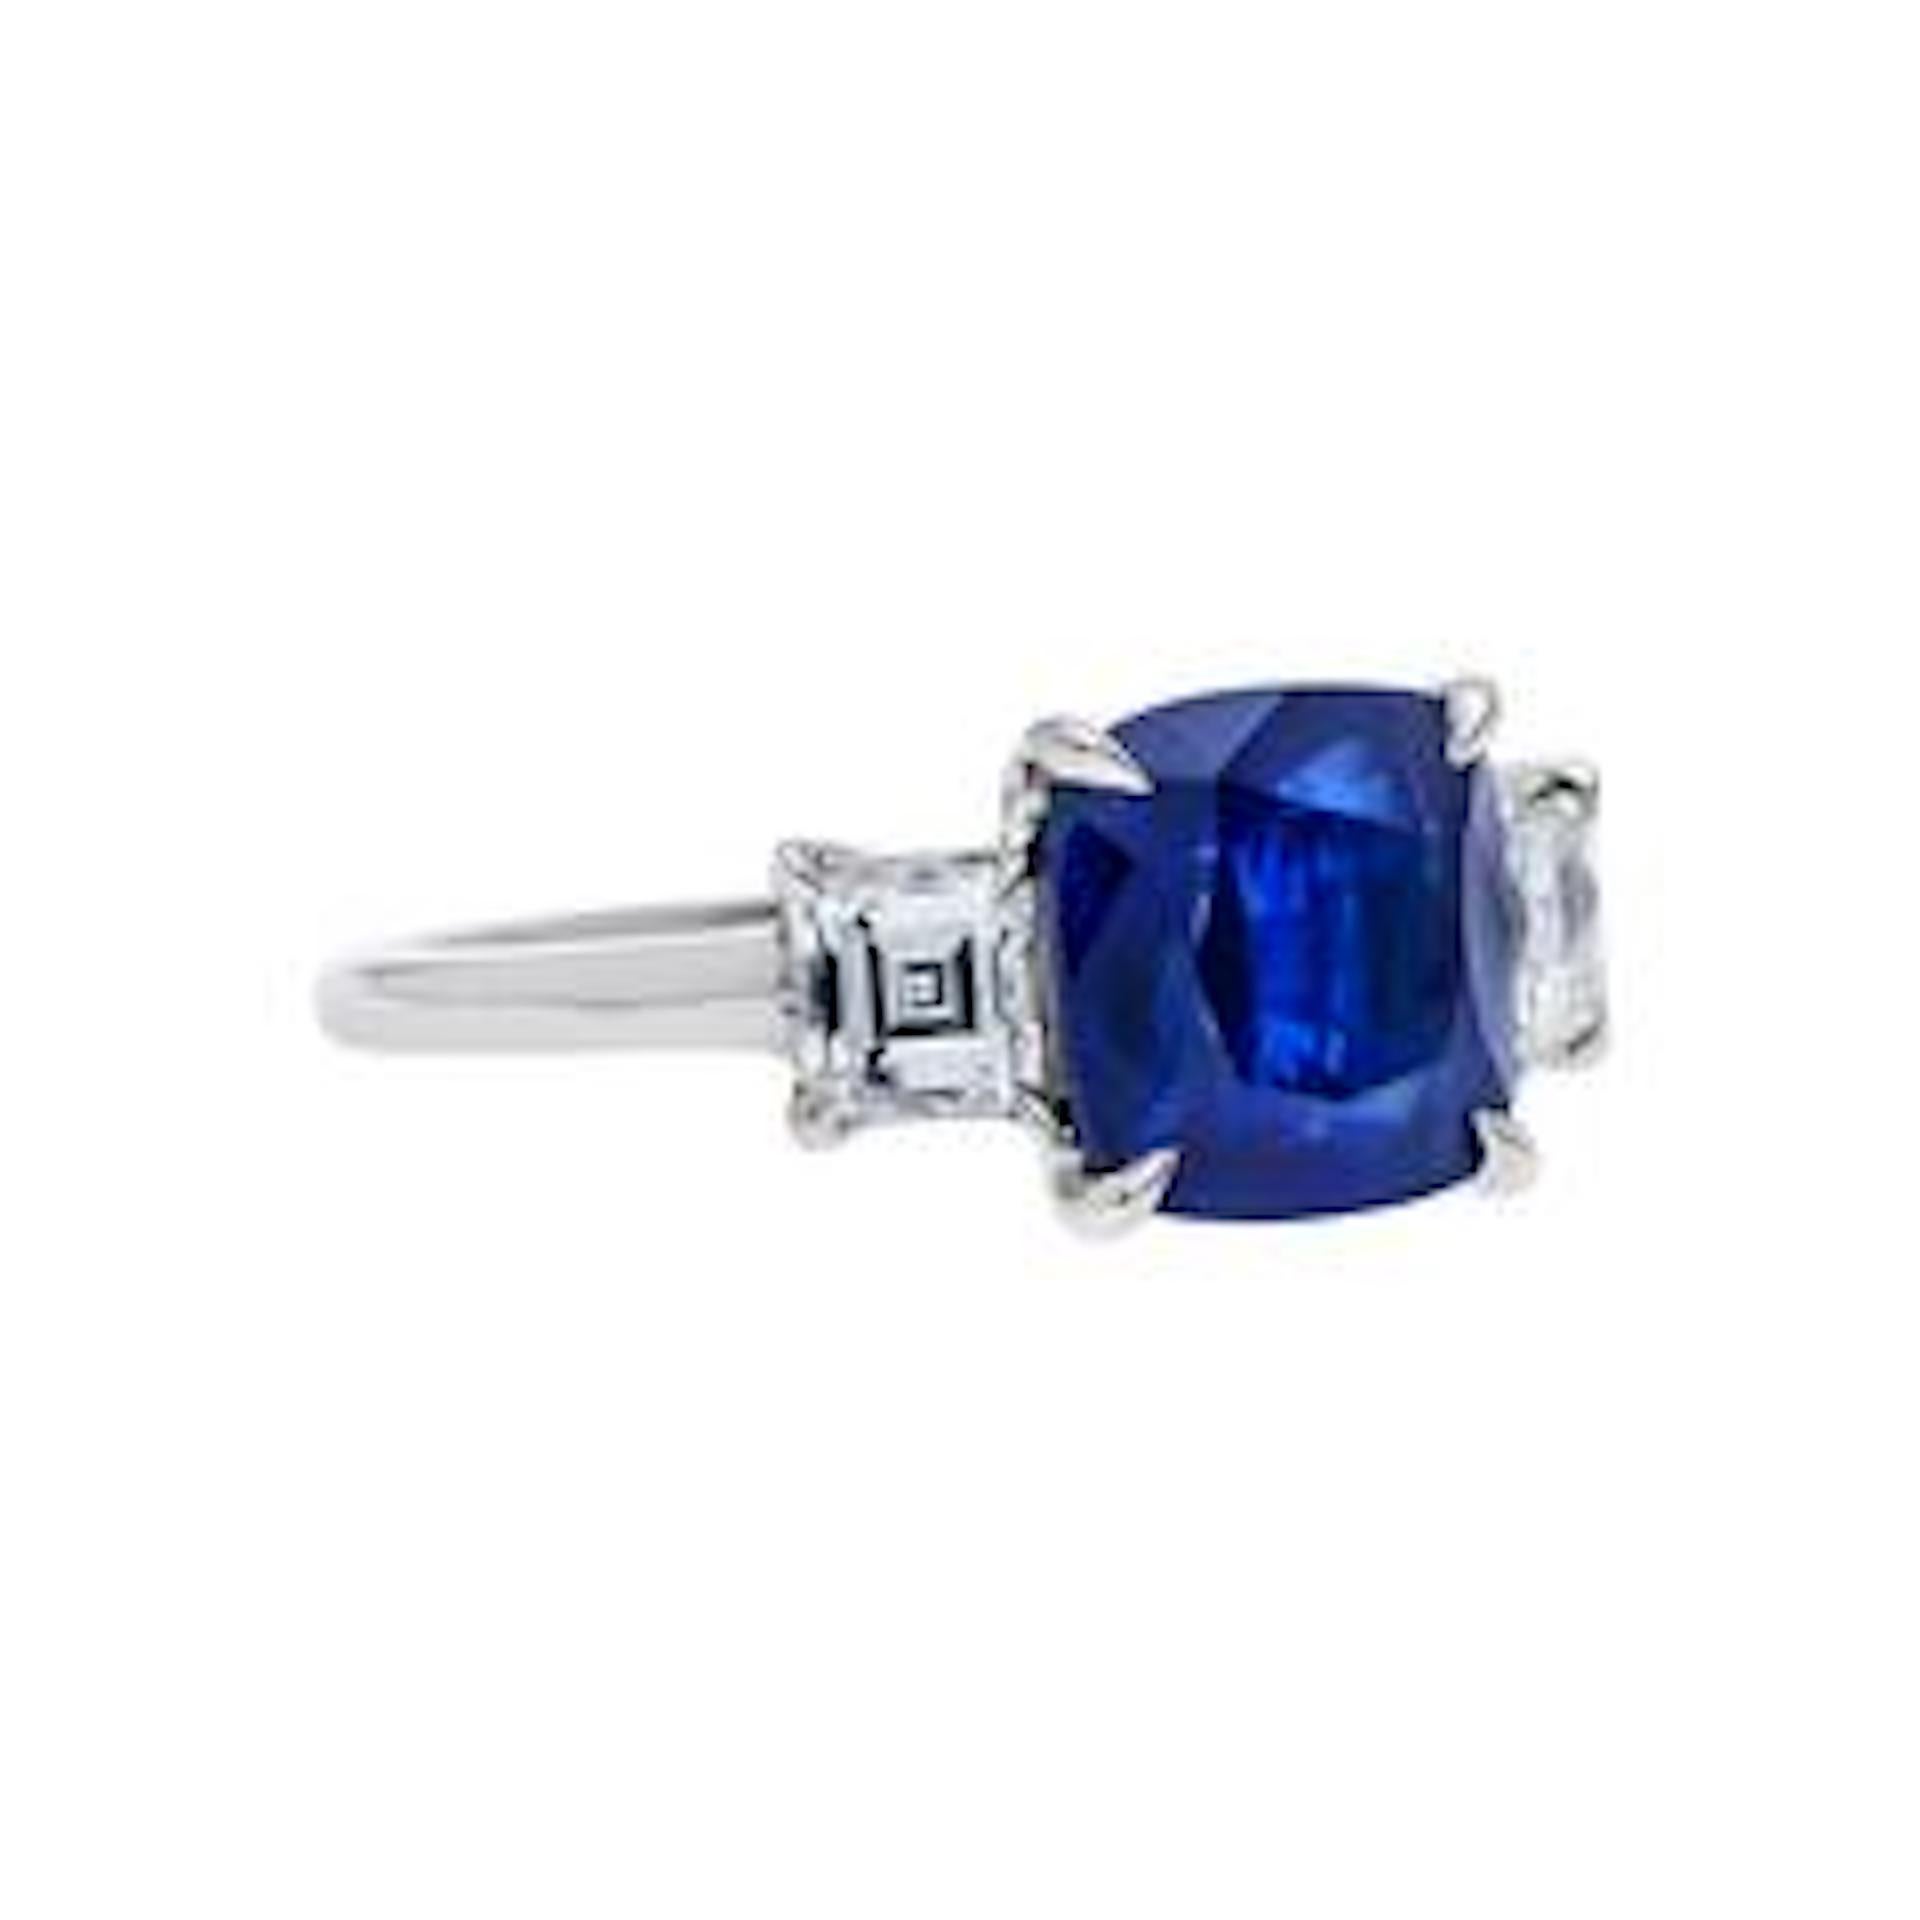 Stone Falls
$14,500.00



Stone Falls is an extraordinary and authentic Modern era (circa 2000) platinum engagement ring. This one-of-a-kind beauty centers a stunning 3.14ct Cushion Cut sapphire accompanied with two highly regarded certificates